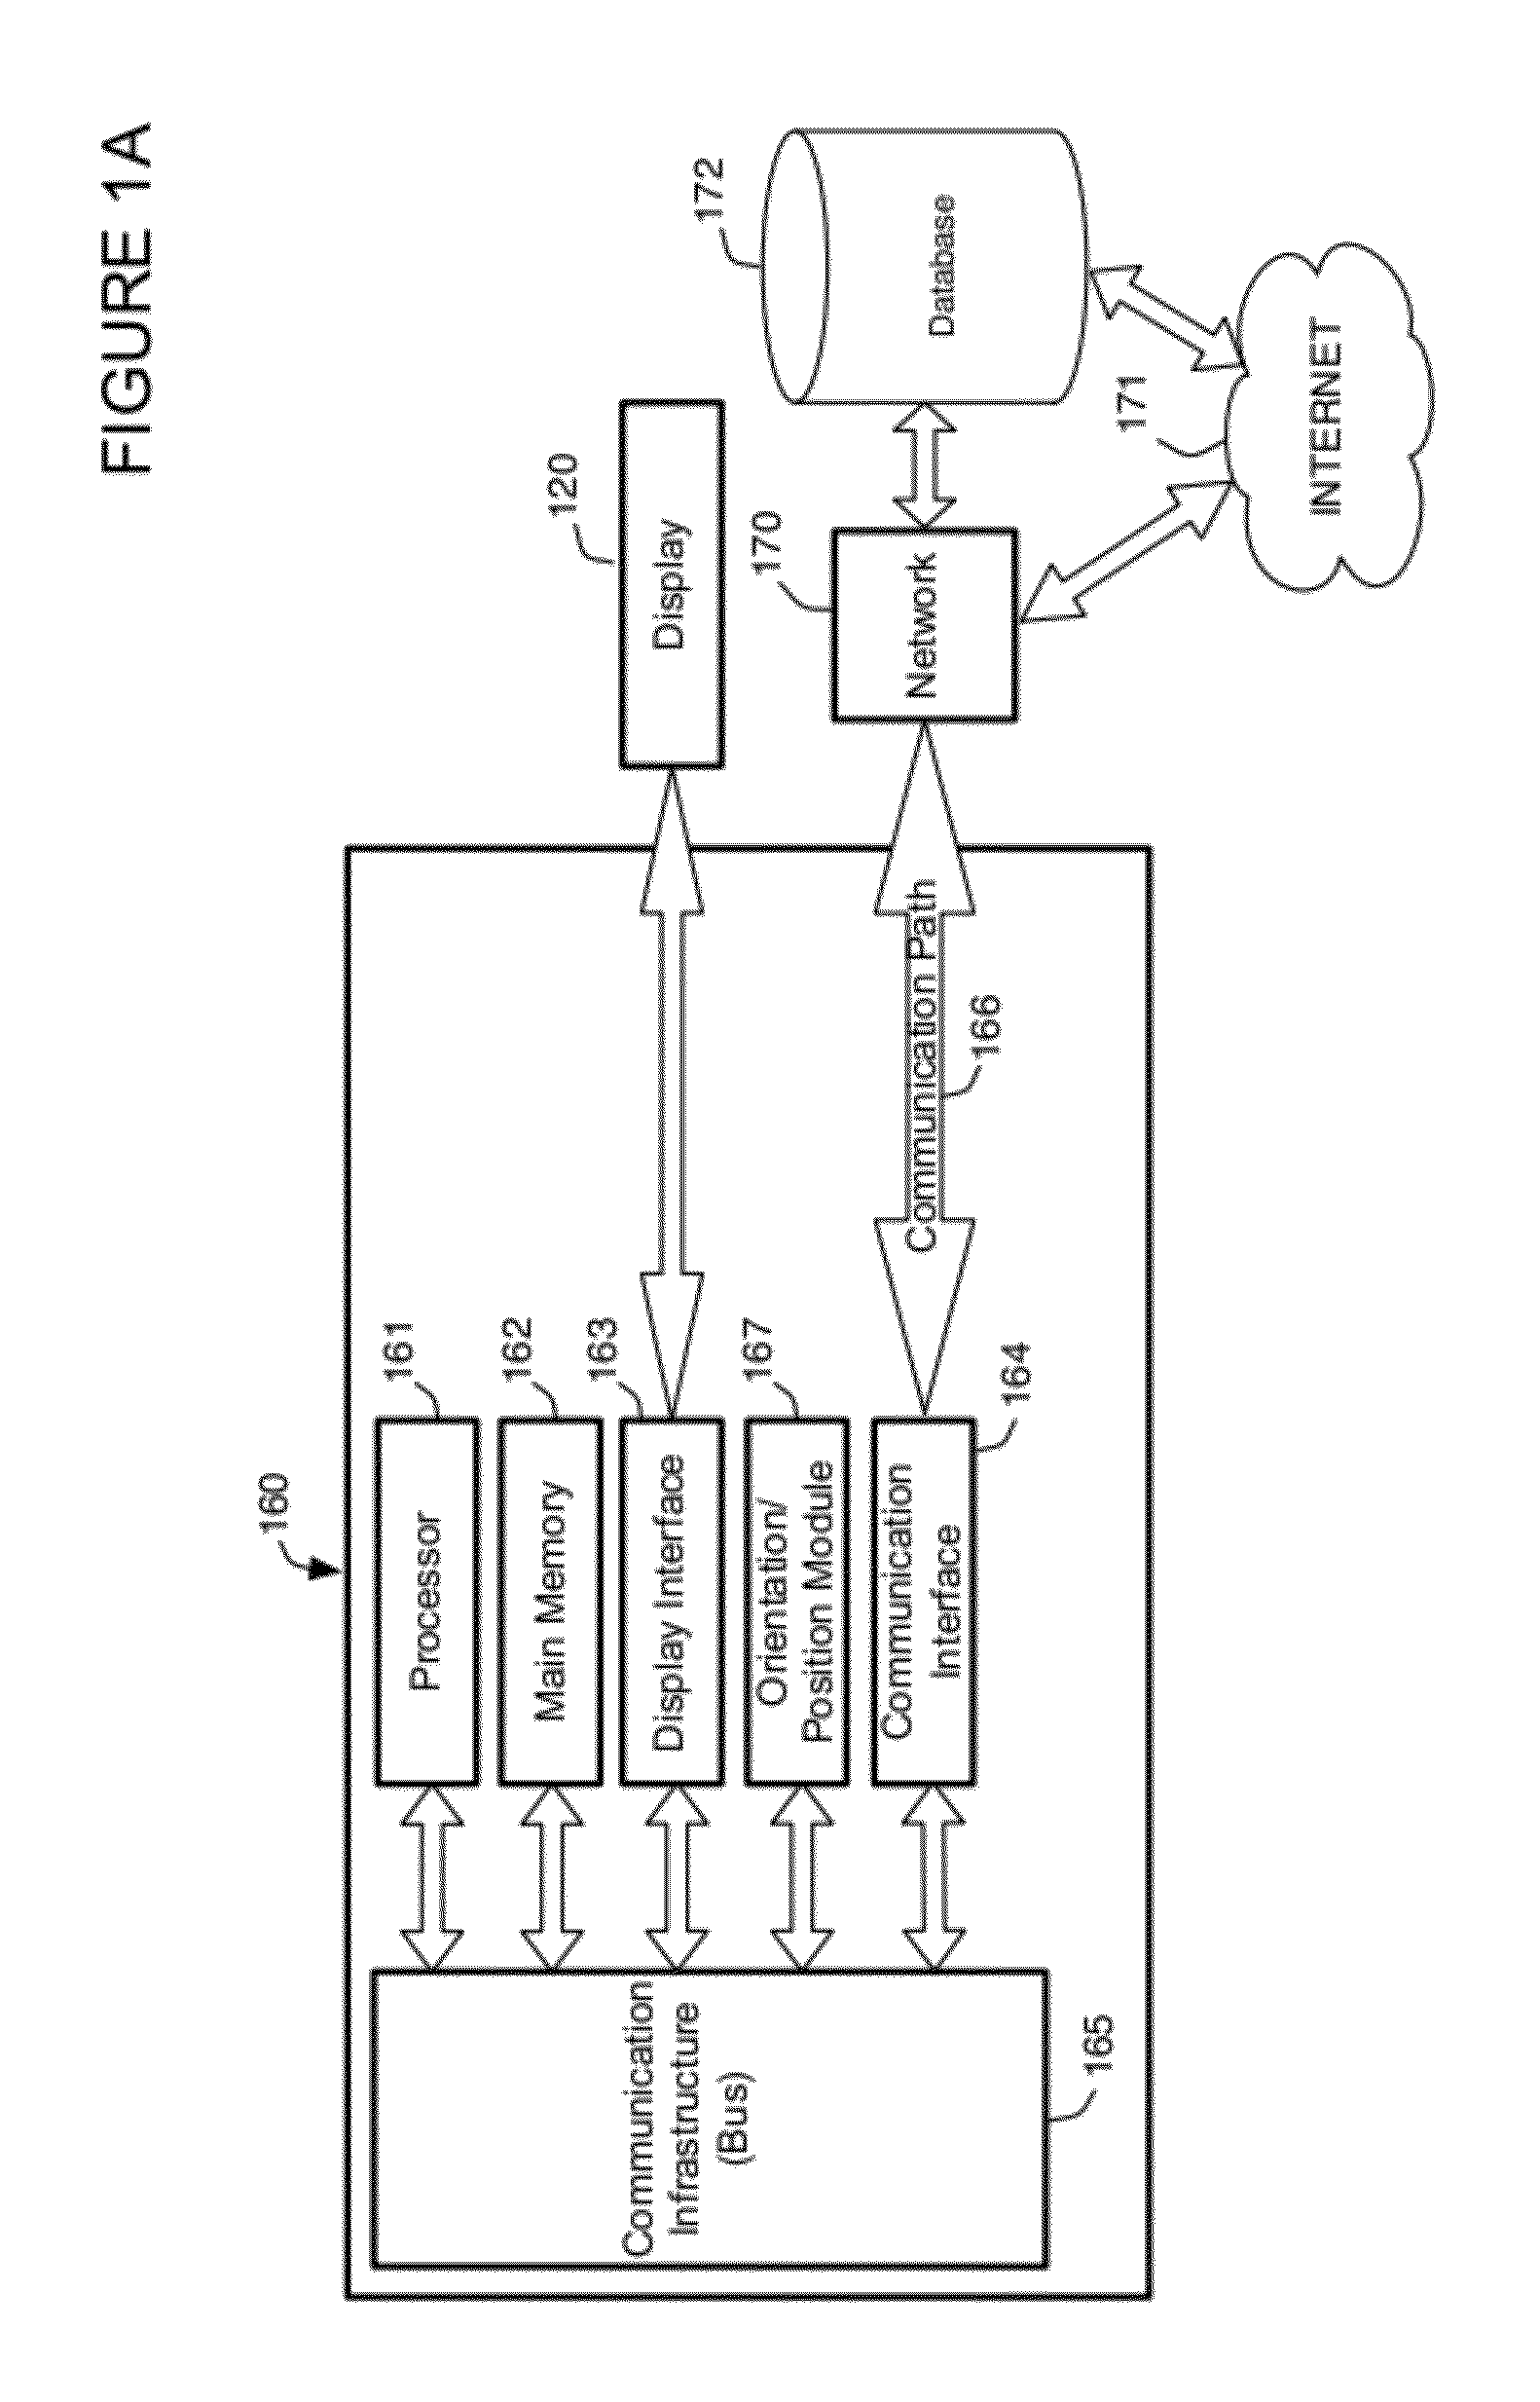 Portable wireless mobile device motion capture data mining system and method